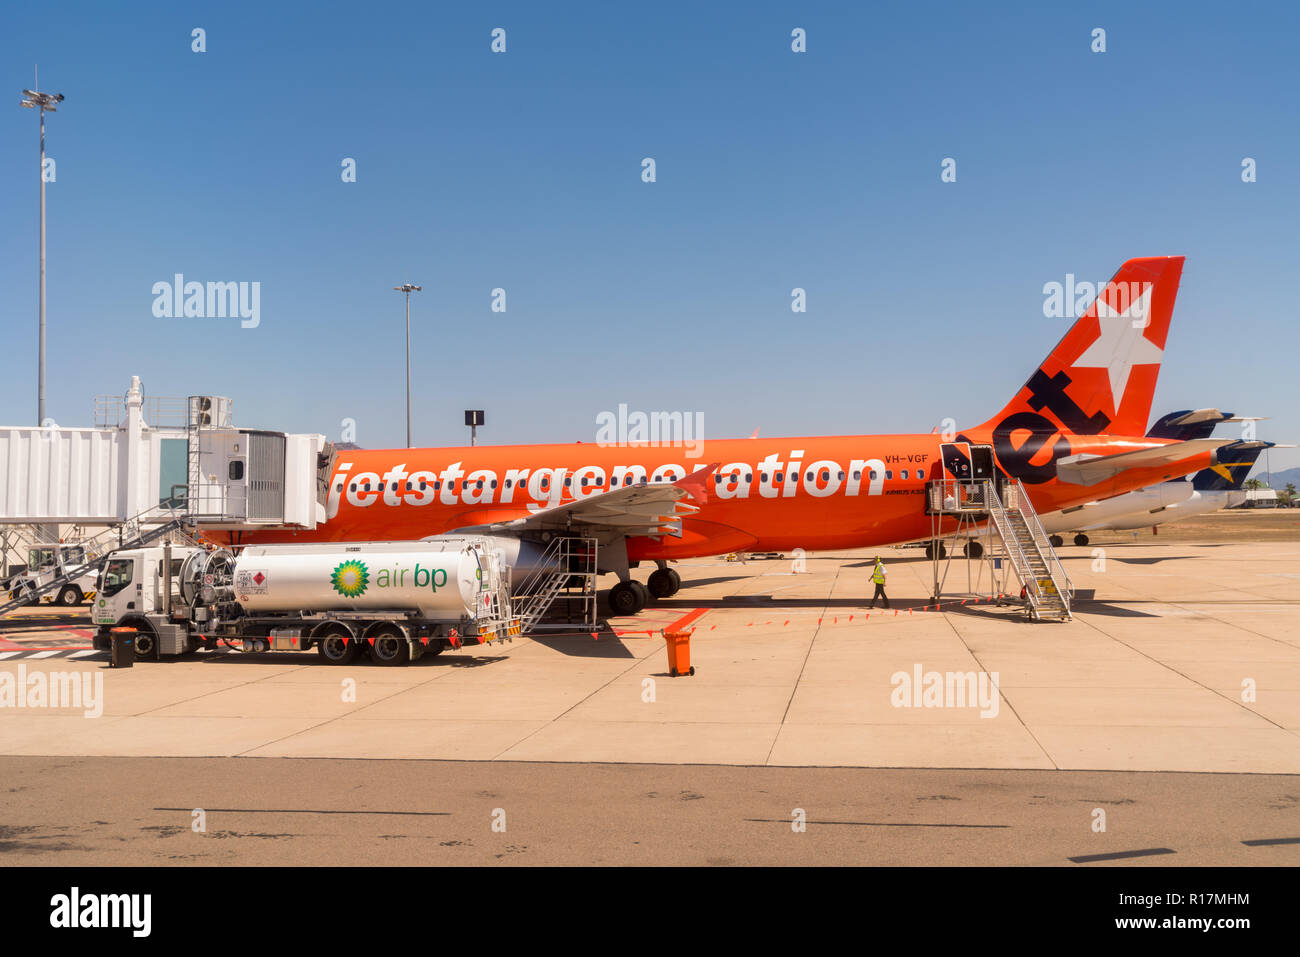 A Jetstar airplane is refueled by Air BP on a hot day at Townsville Airport, Queensland, QLD, Australia. Stock Photo